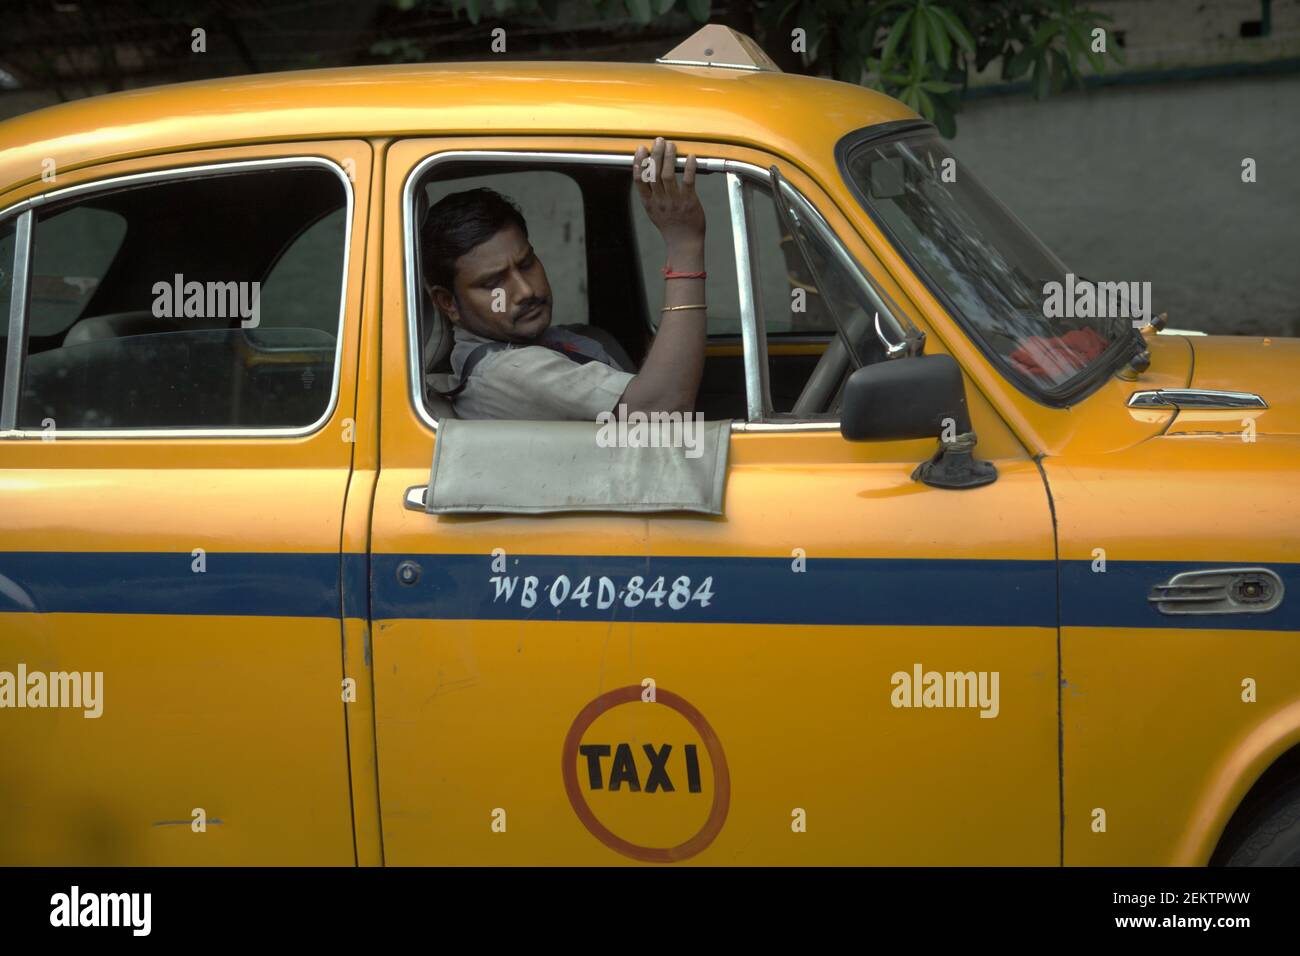 Portrait of a yellow taxi driver during a traffic congestion in Kolkata, West Bengal, India (2013).   Kolkata's yellow taxis are lately "hardly visible on the streets" of the city, according to a publication by "Kolkata on Wheels", a monthly motoring and lifestyle magazine. Stock Photo